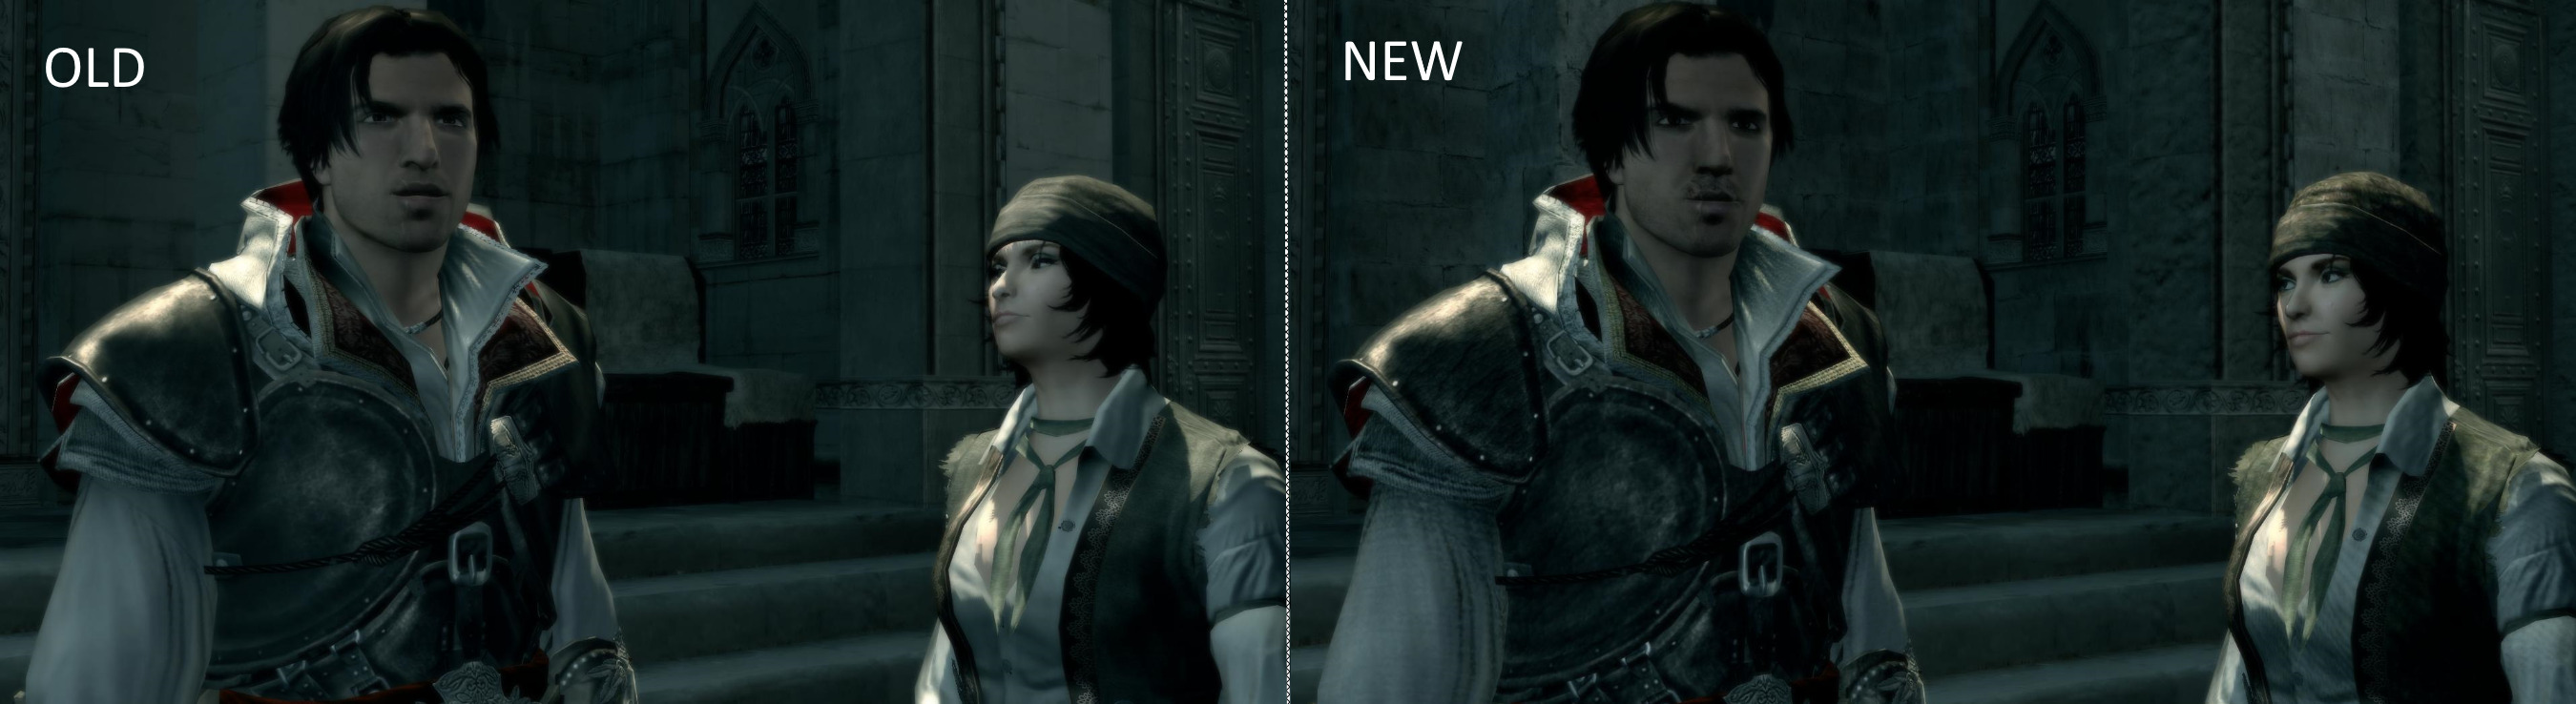 New Abbass Comparison WIP image - Assassin's Creed overhaul mod for Assassin's  Creed - ModDB